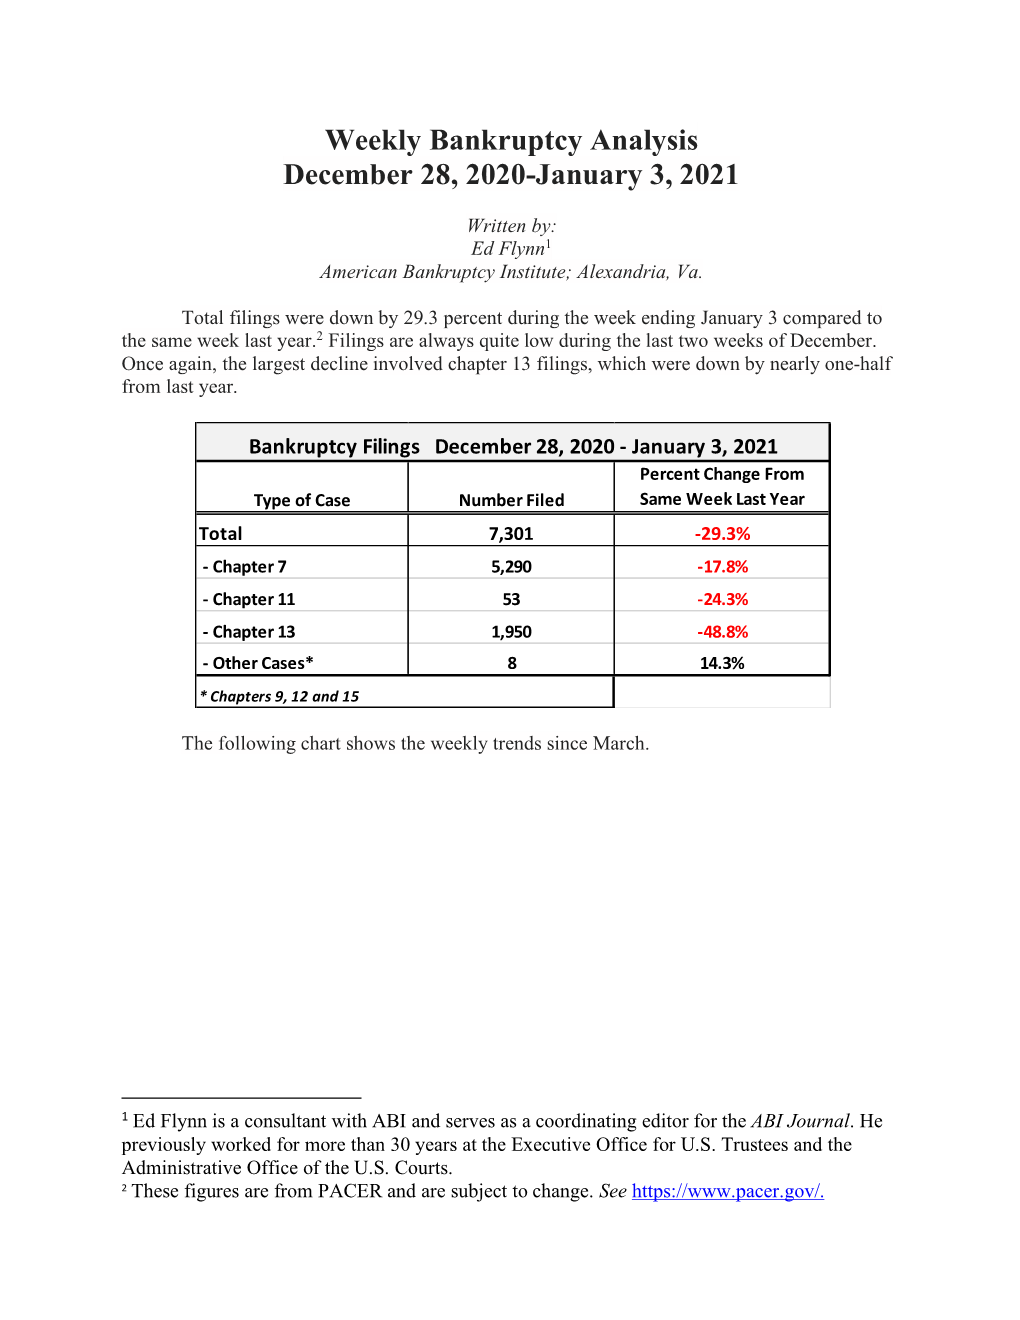 Weekly Bankruptcy Analysis December 28, 2020-January 3, 2021